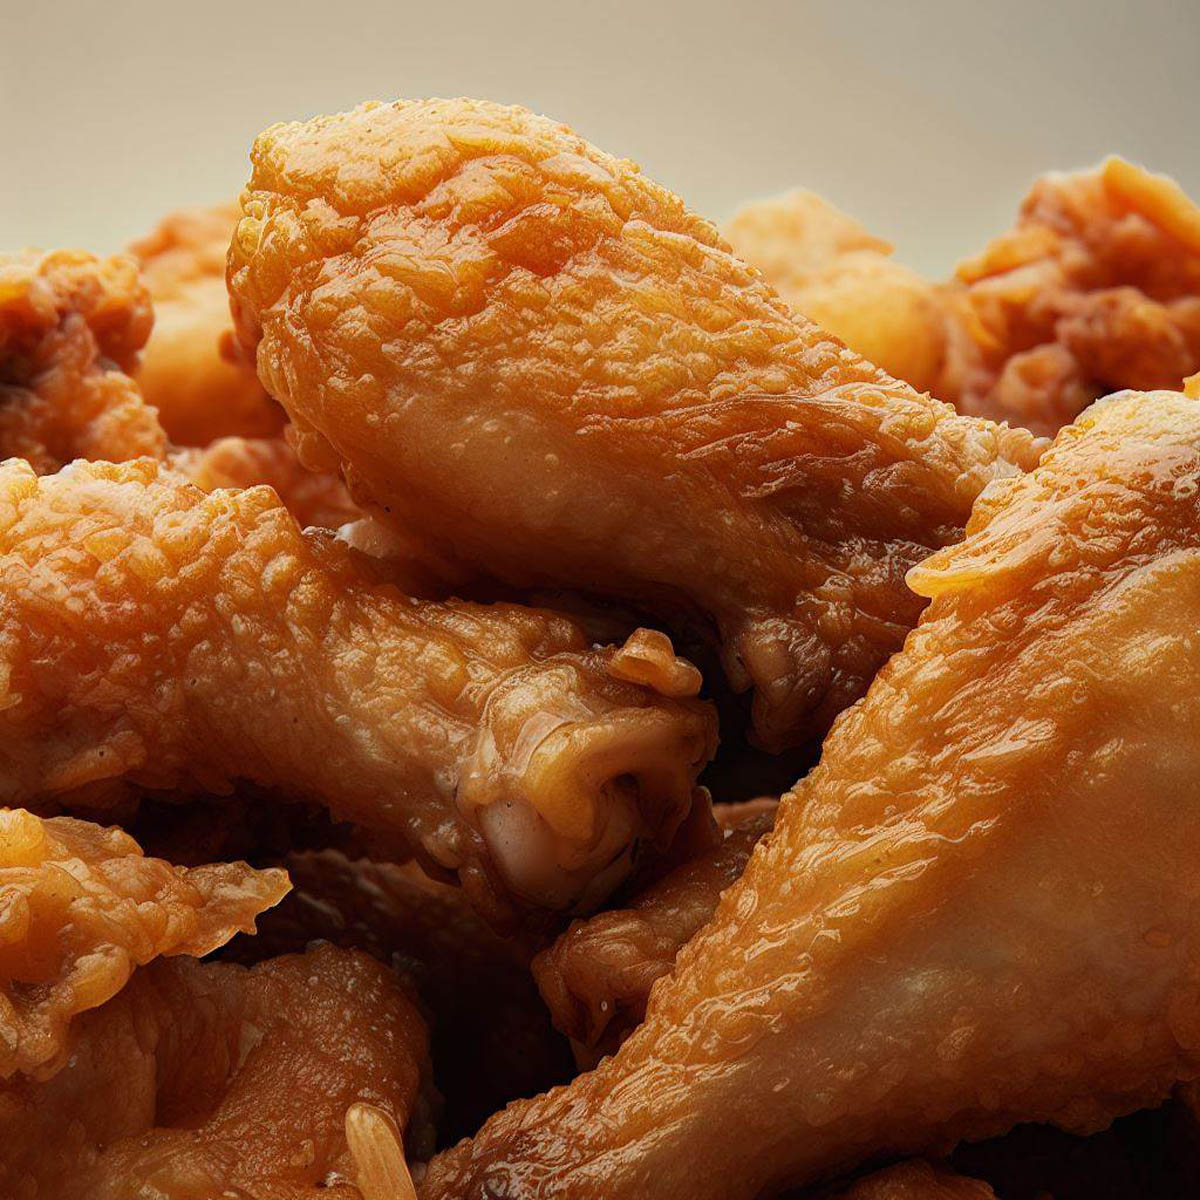 Tantalizing coconut-fried chicken pieces, golden and crispy, set against a soft focus backdrop.